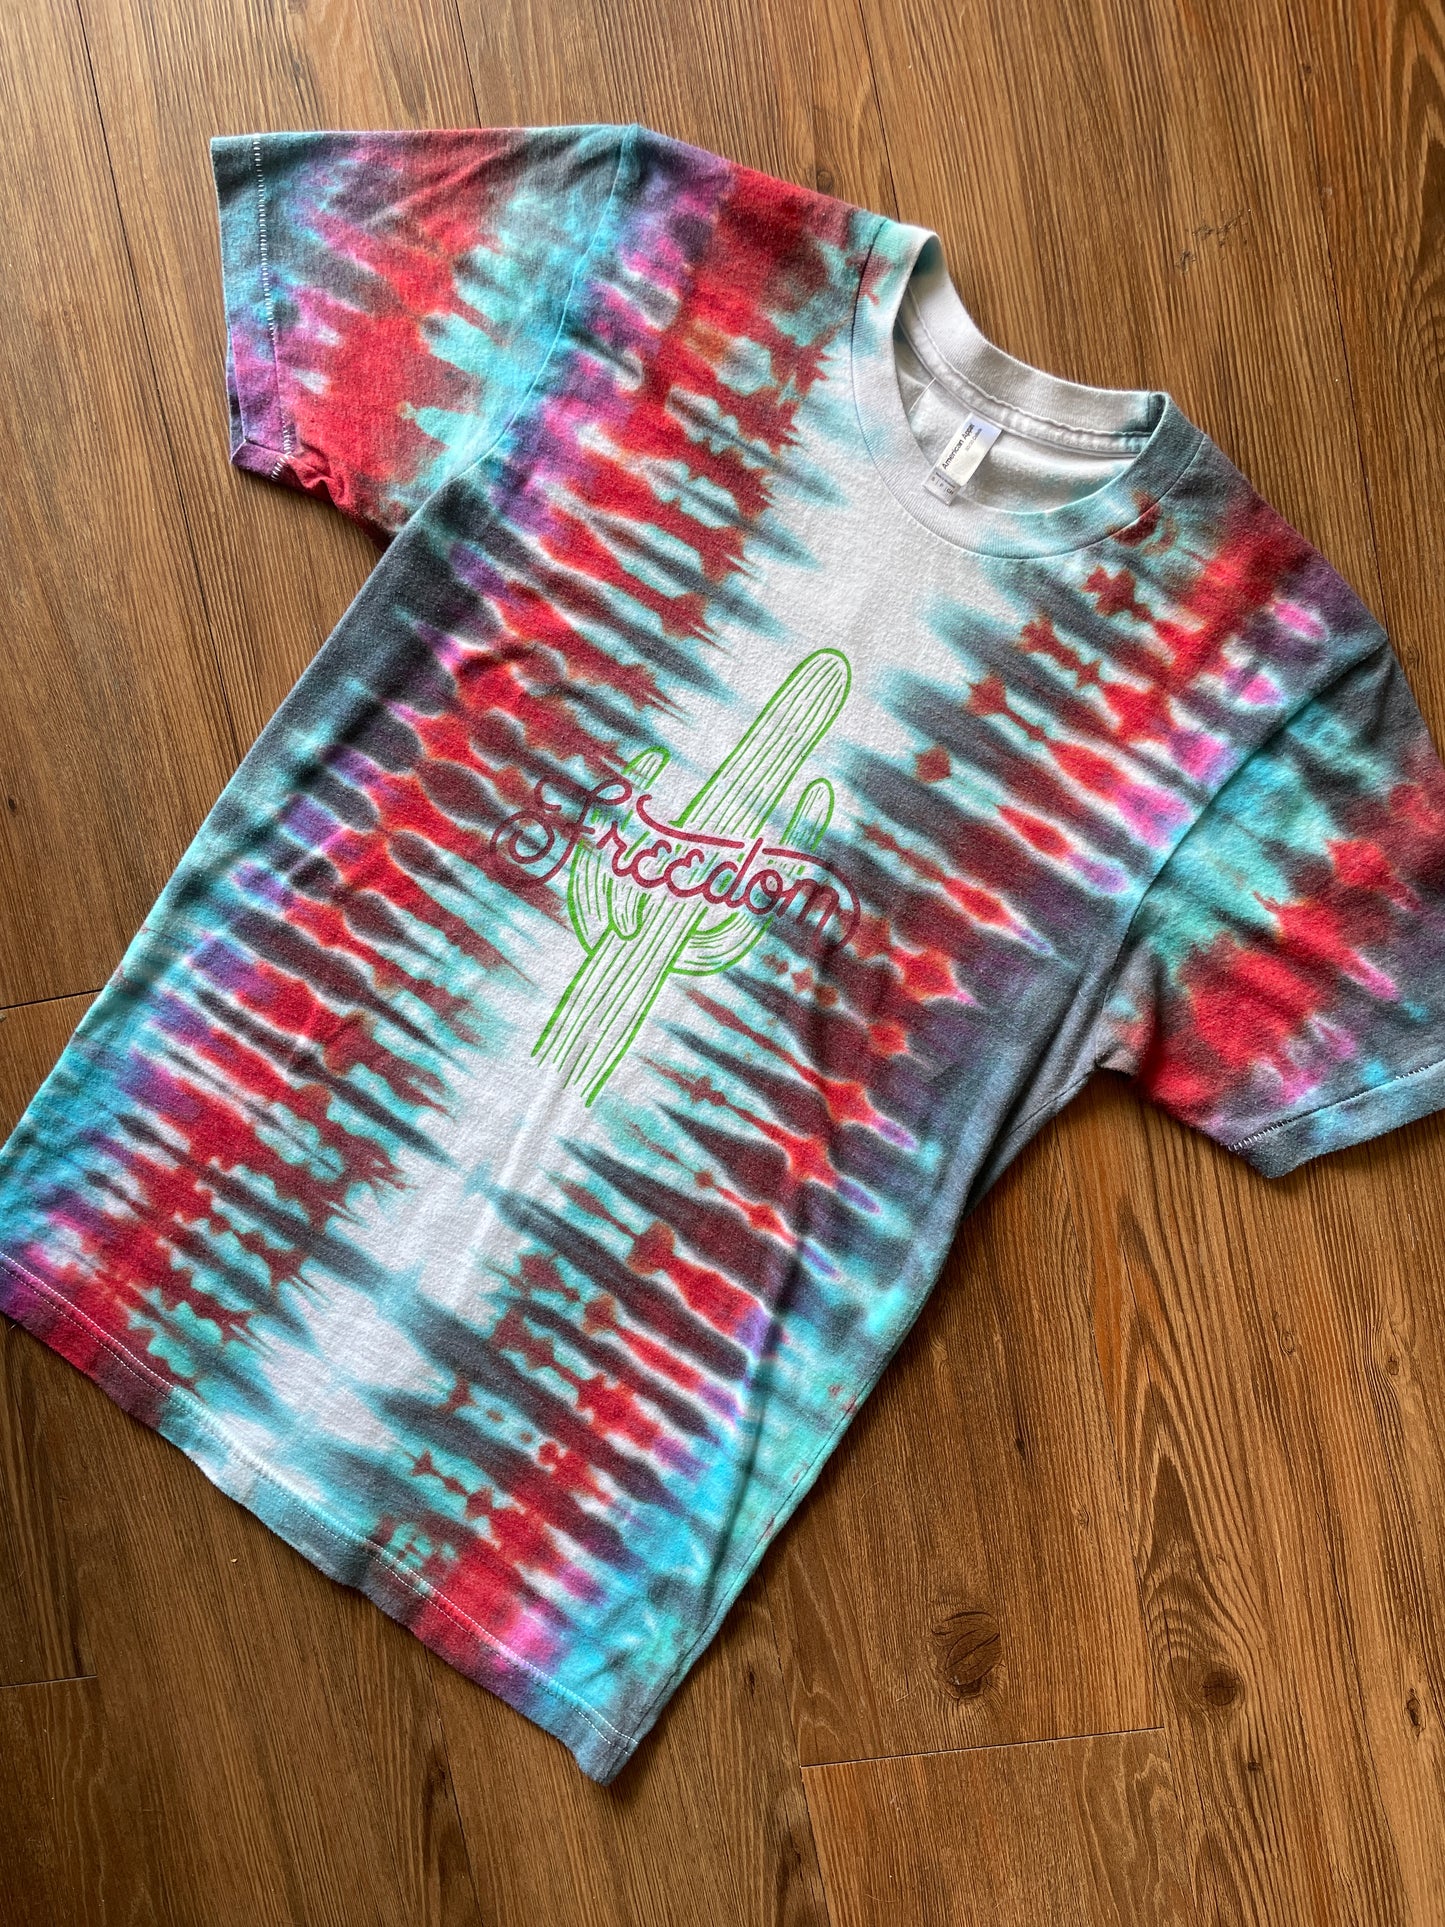 SMALL Unisex American Apparel Freedom Handmade Tie Dye T-Shirt | One-Of-a-Kind Red, Blue, and Gray Pleated Short Sleeve